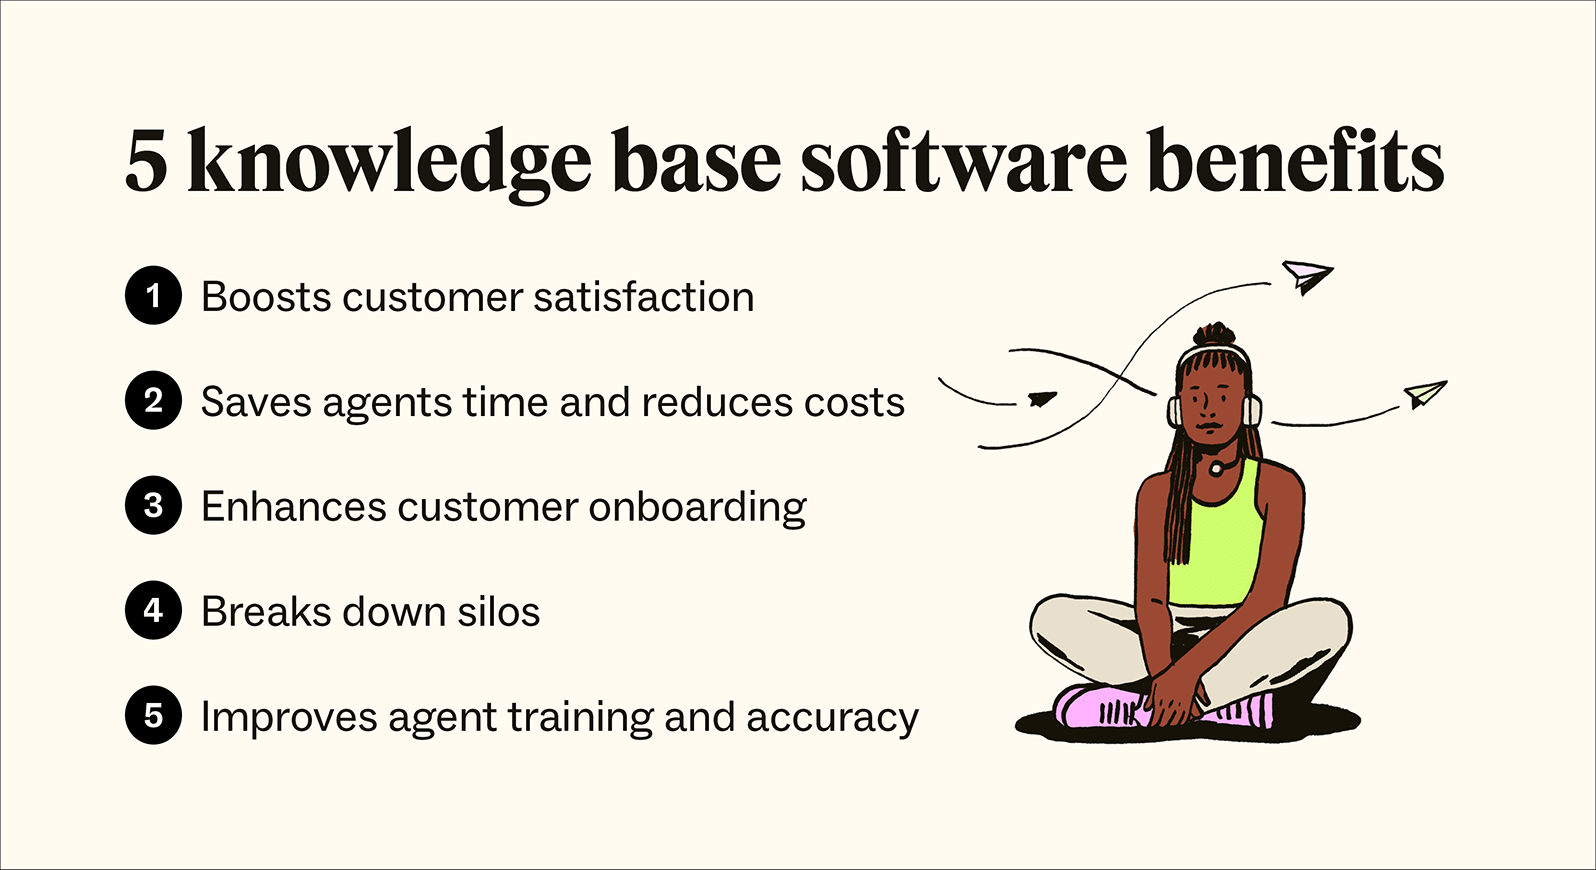 Some of the key benefits businesses gain from using knowledge base software include boosting customer satisfaction, saving agents time, breaking down silos, improving agent training, and enhancing customer onboarding.